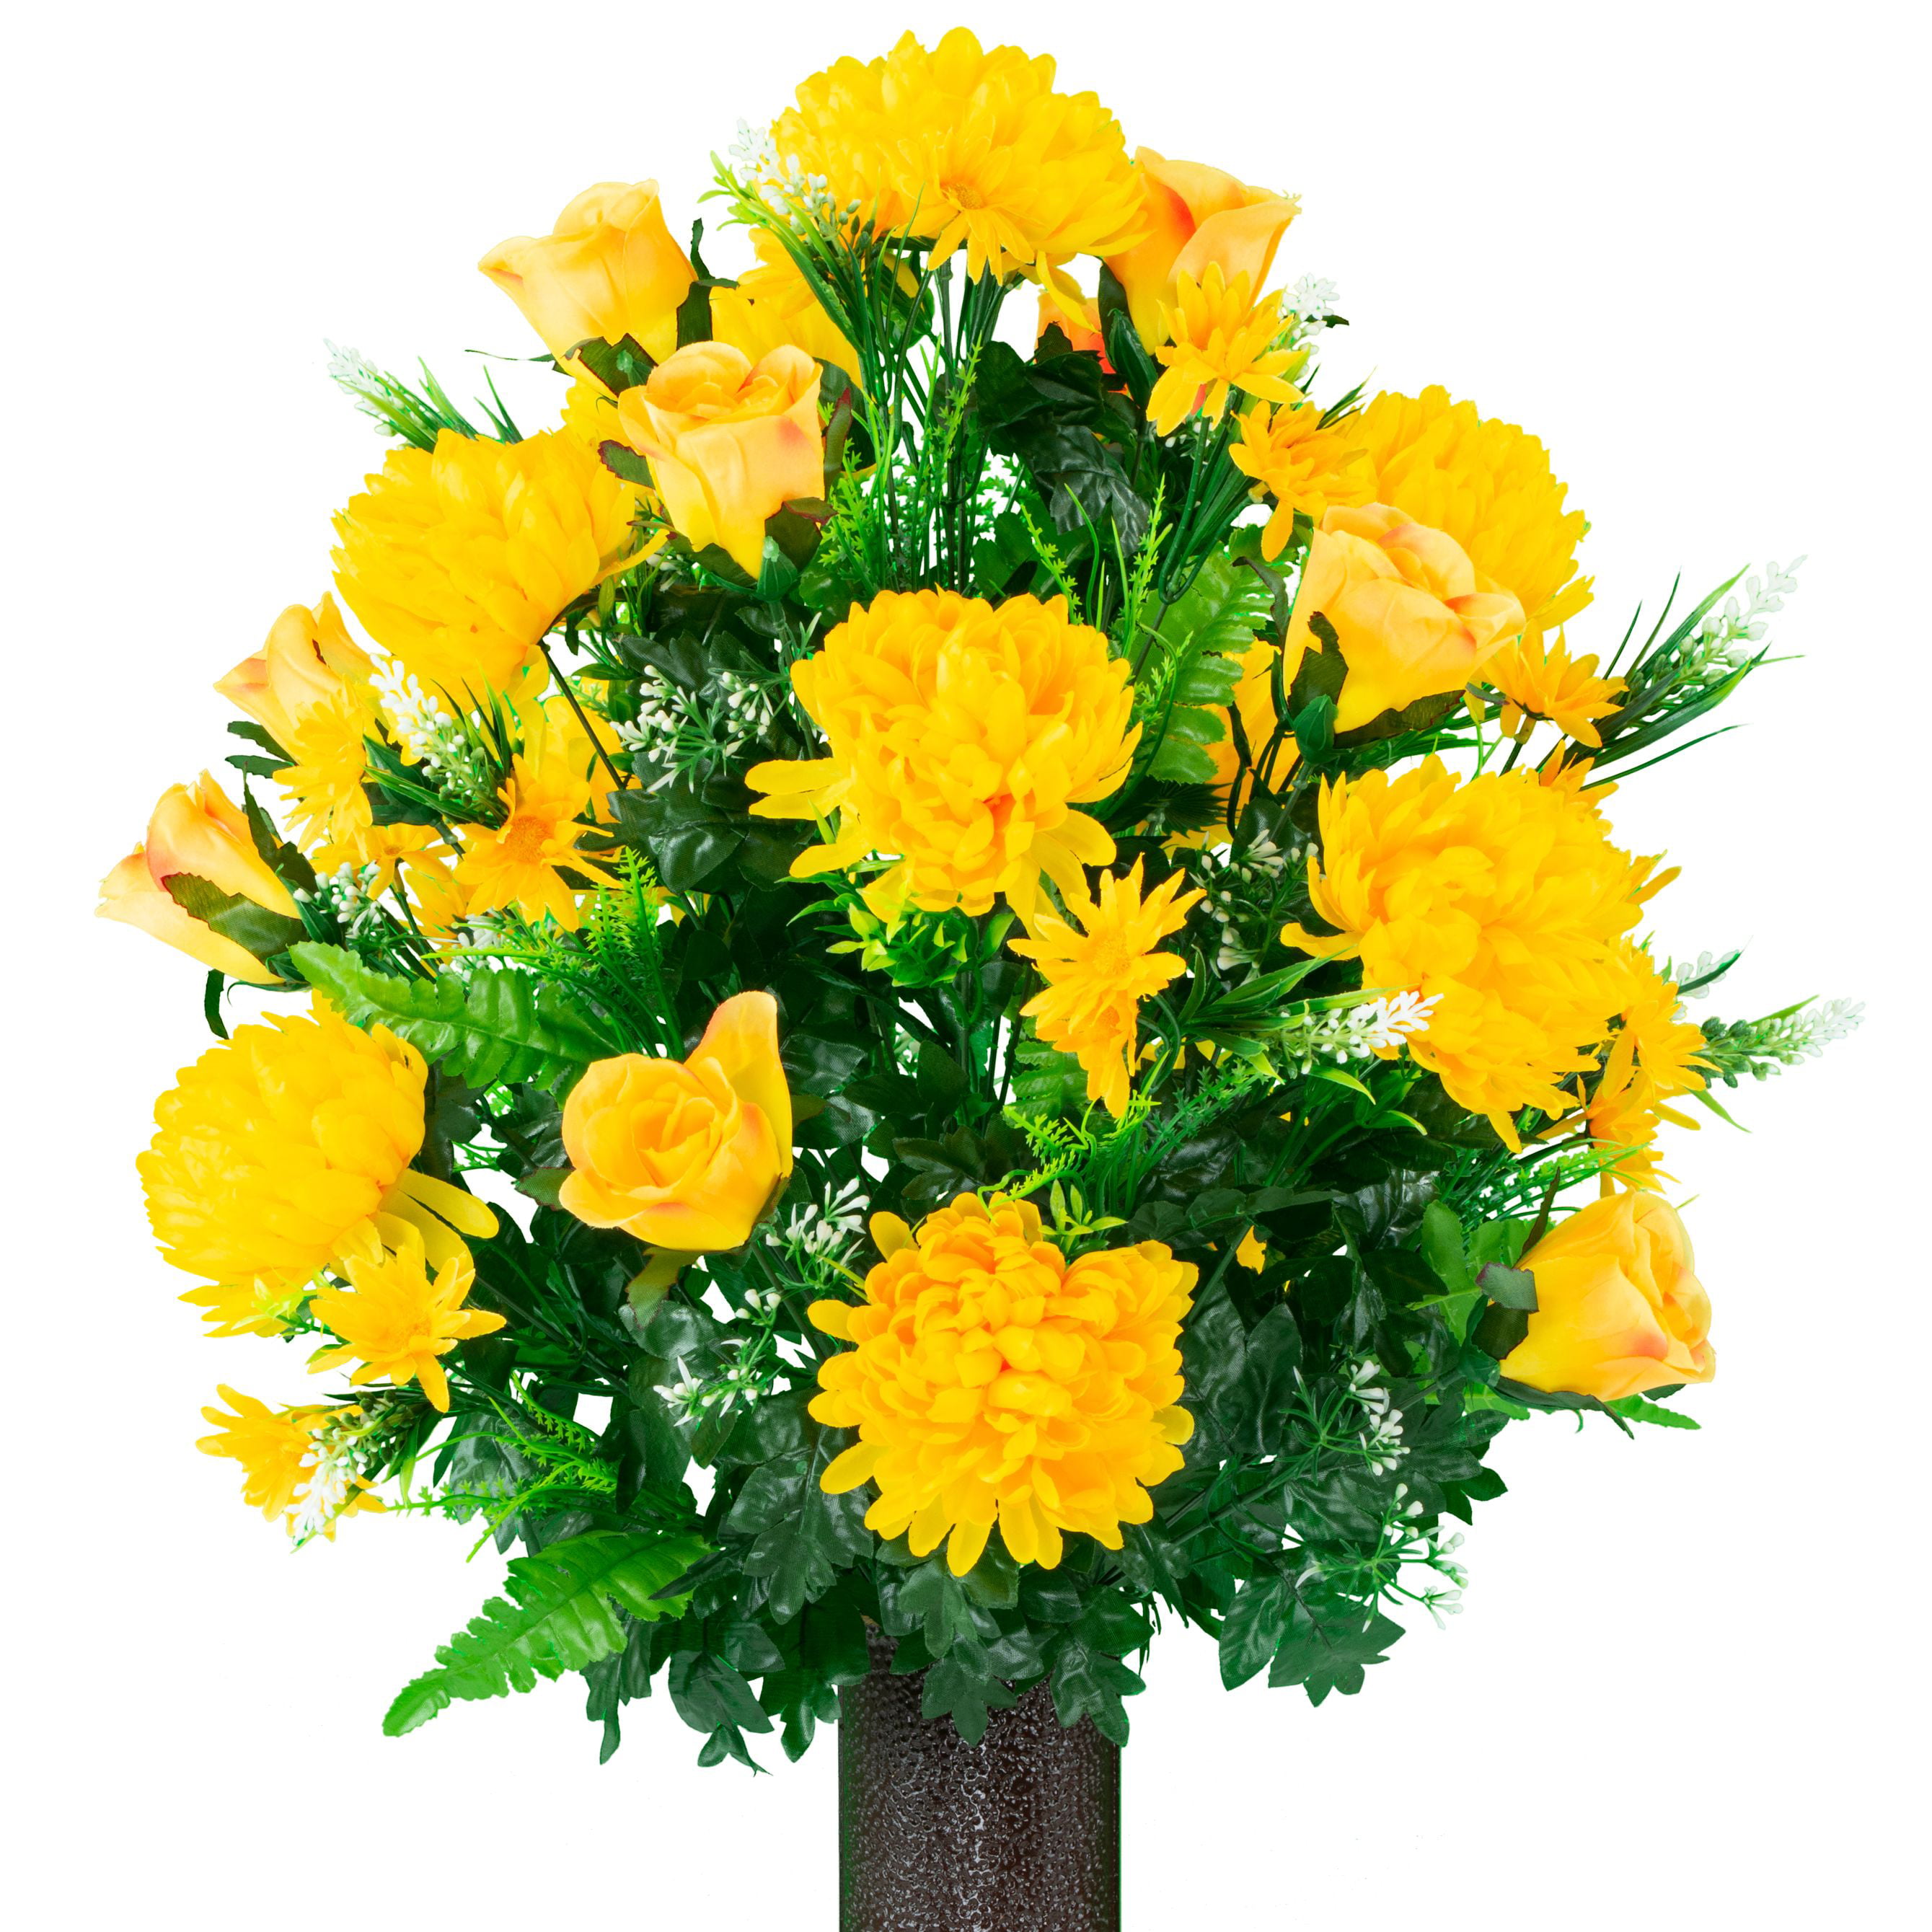 Sympathy Silks Artificial Cemetery Flowers – Realistic - Outdoor Grave